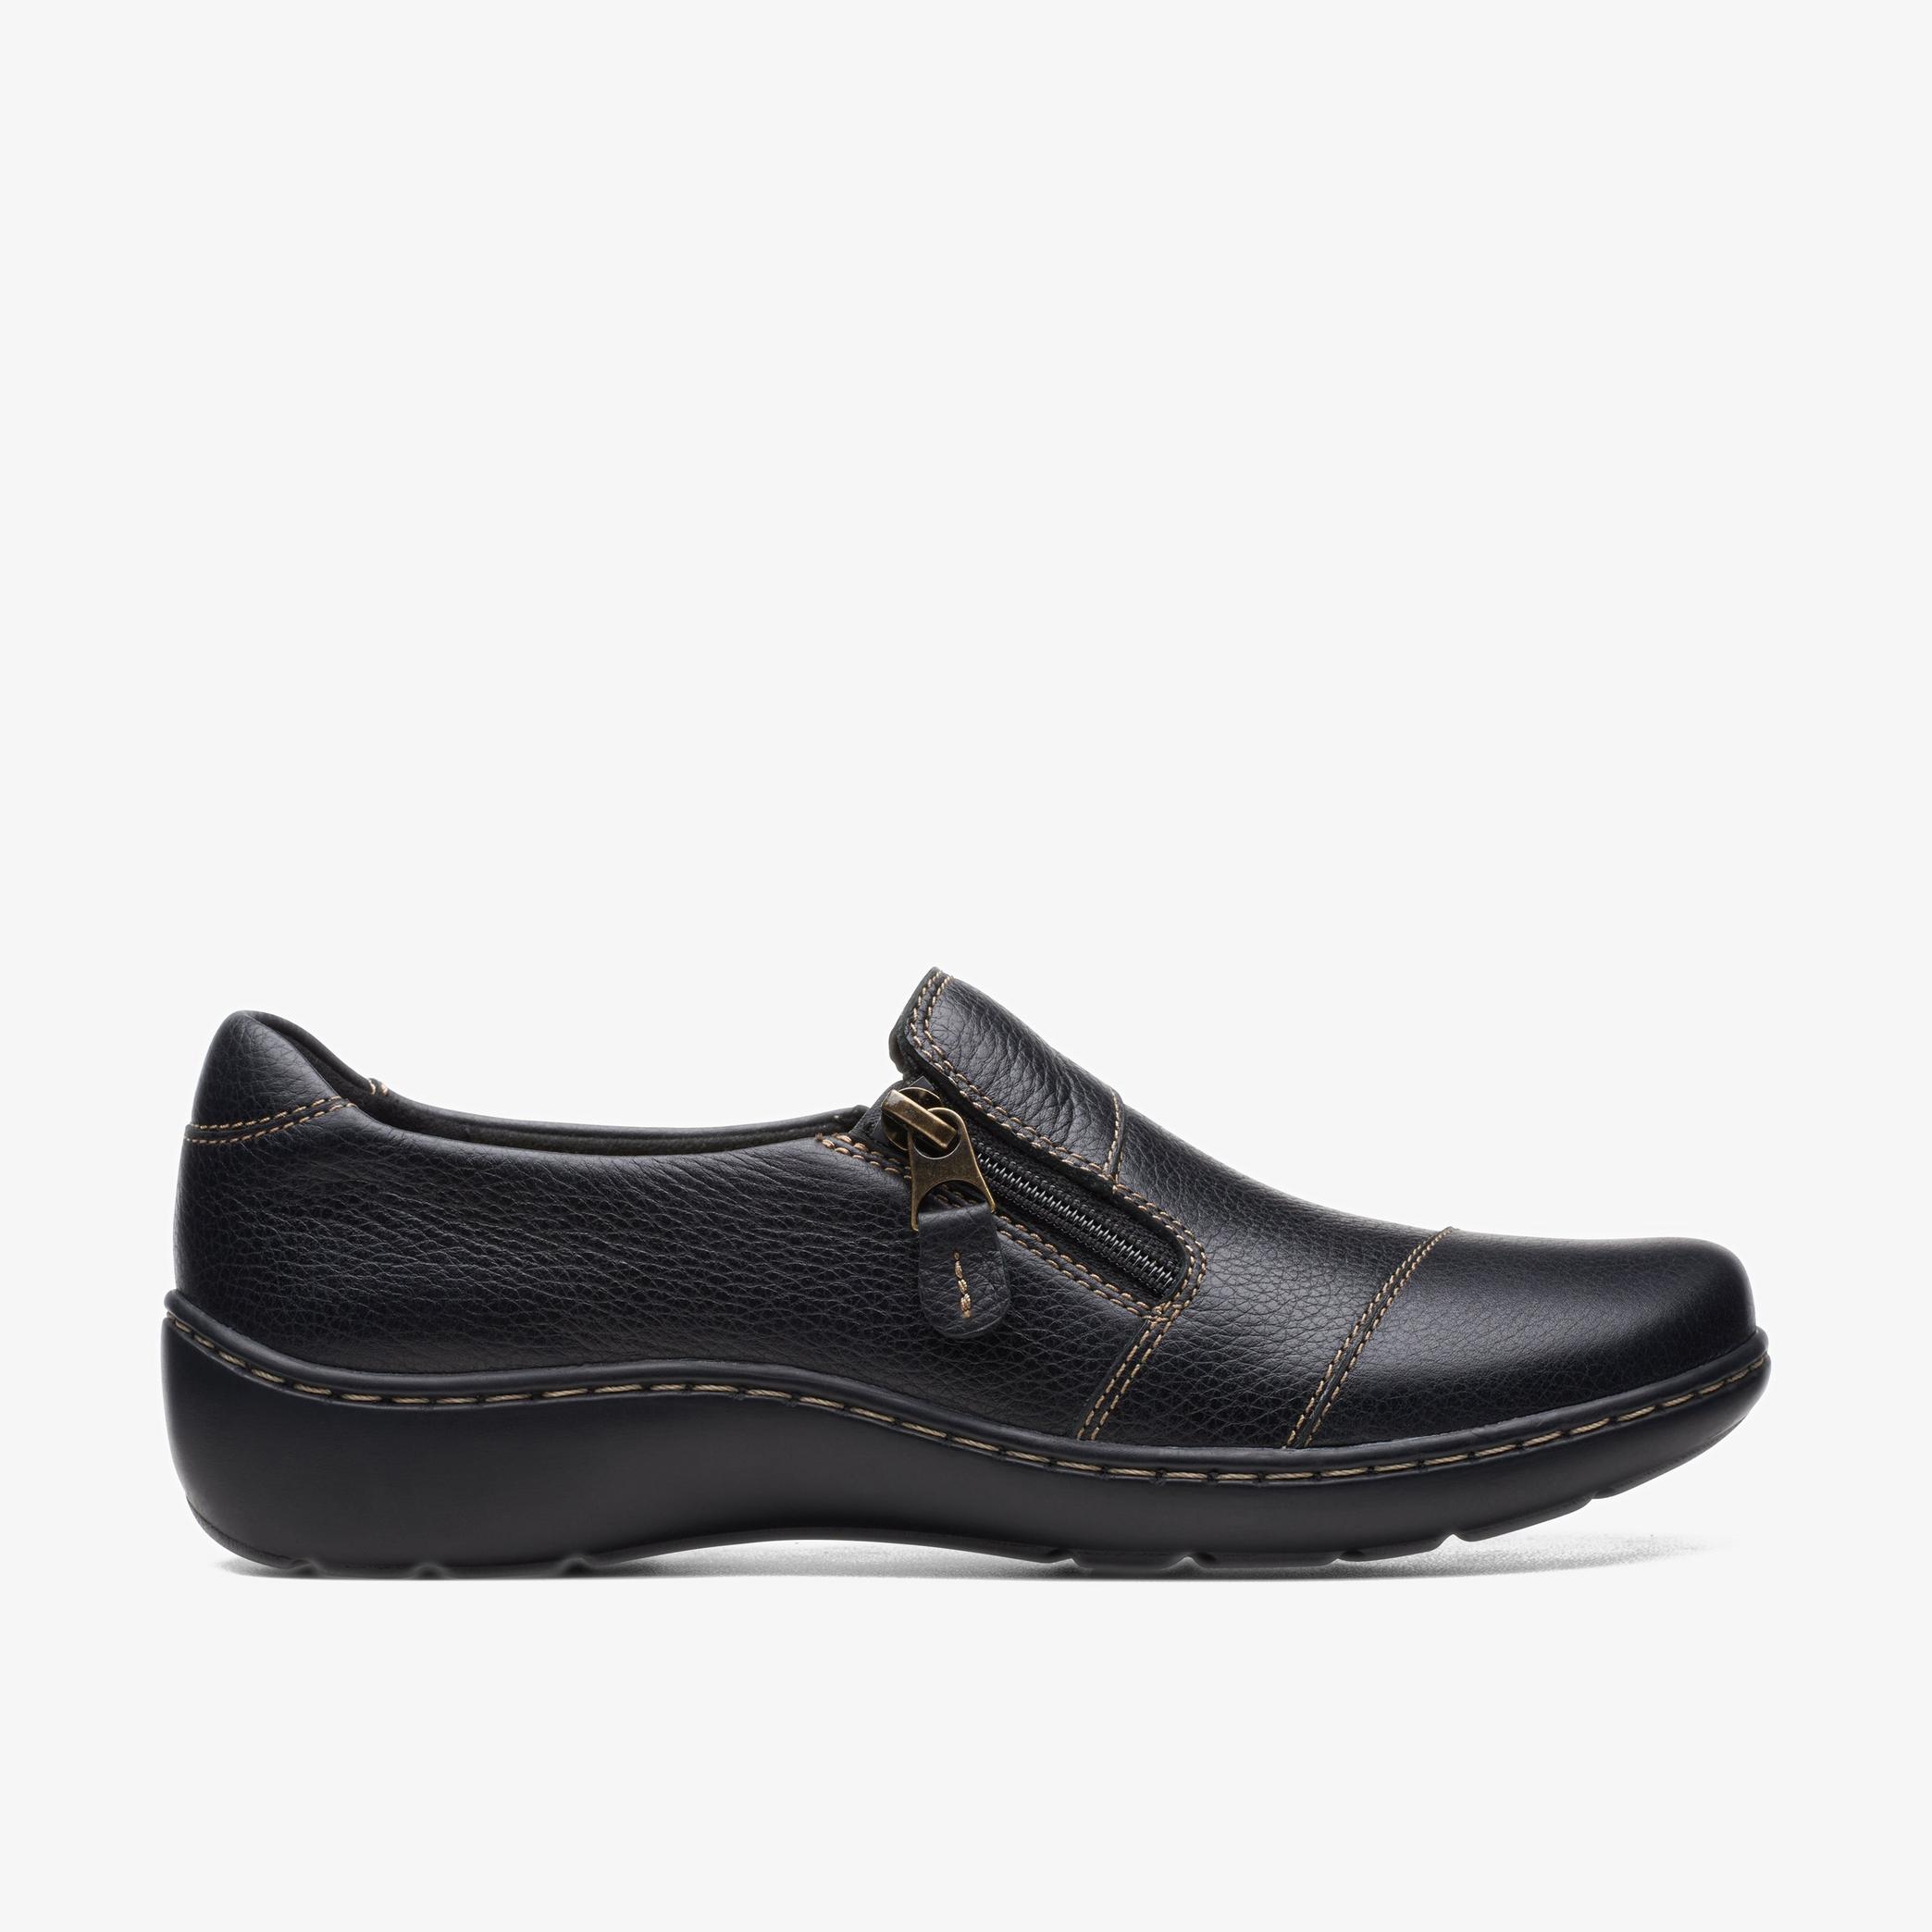 Cora Harbor Black Leather Shoes, view 1 of 6